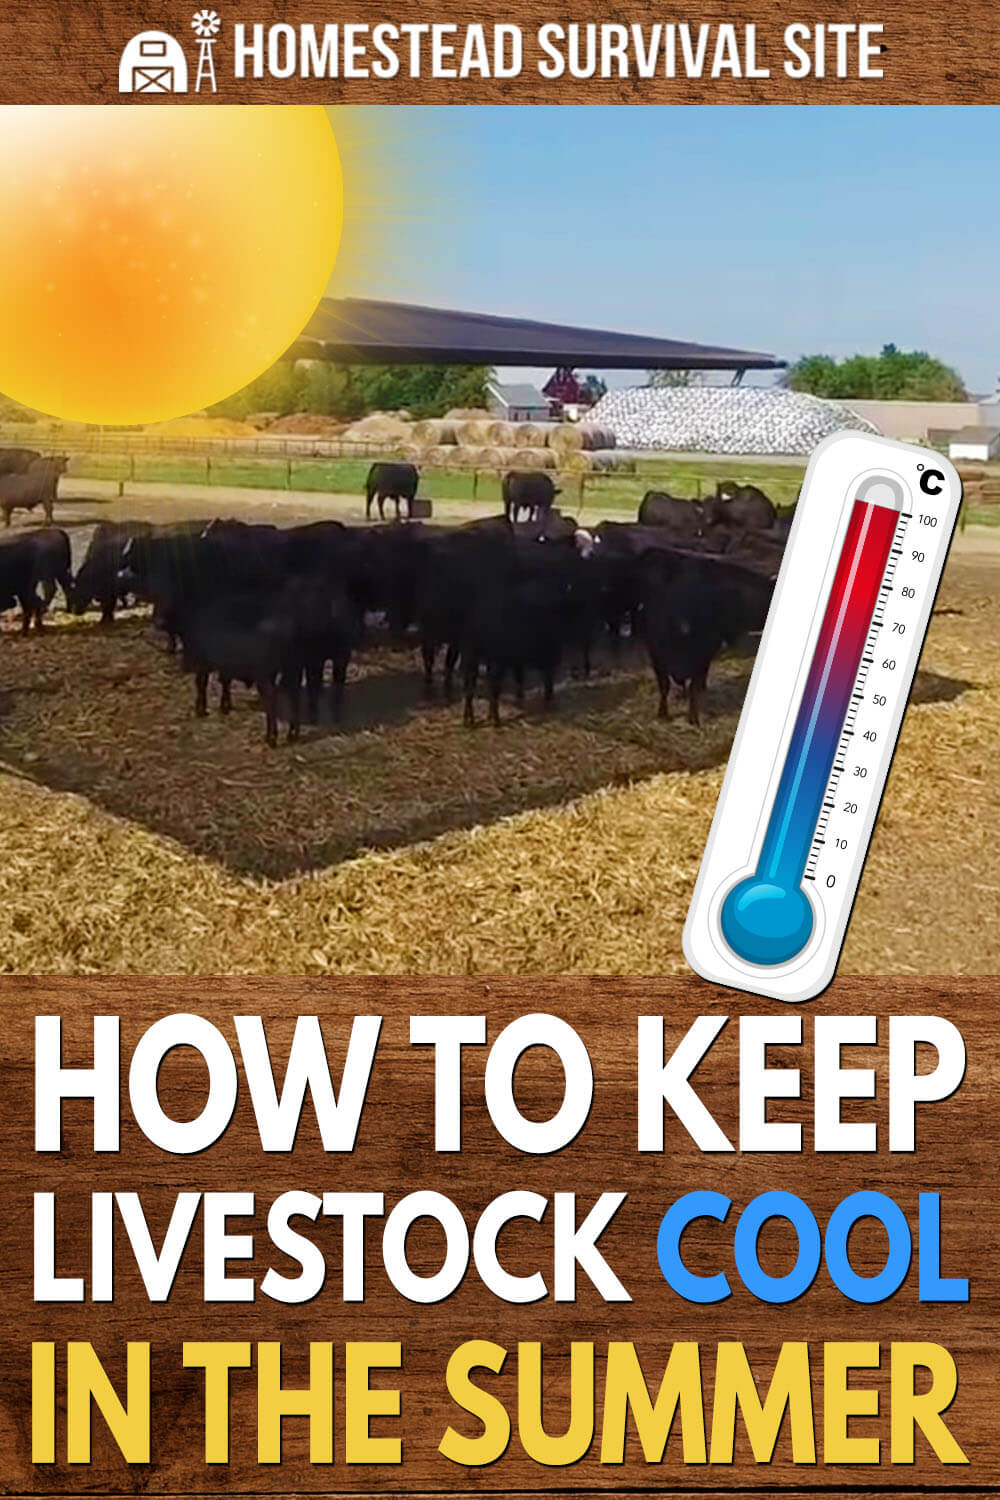 How to Keep Livestock Cool in the Summer